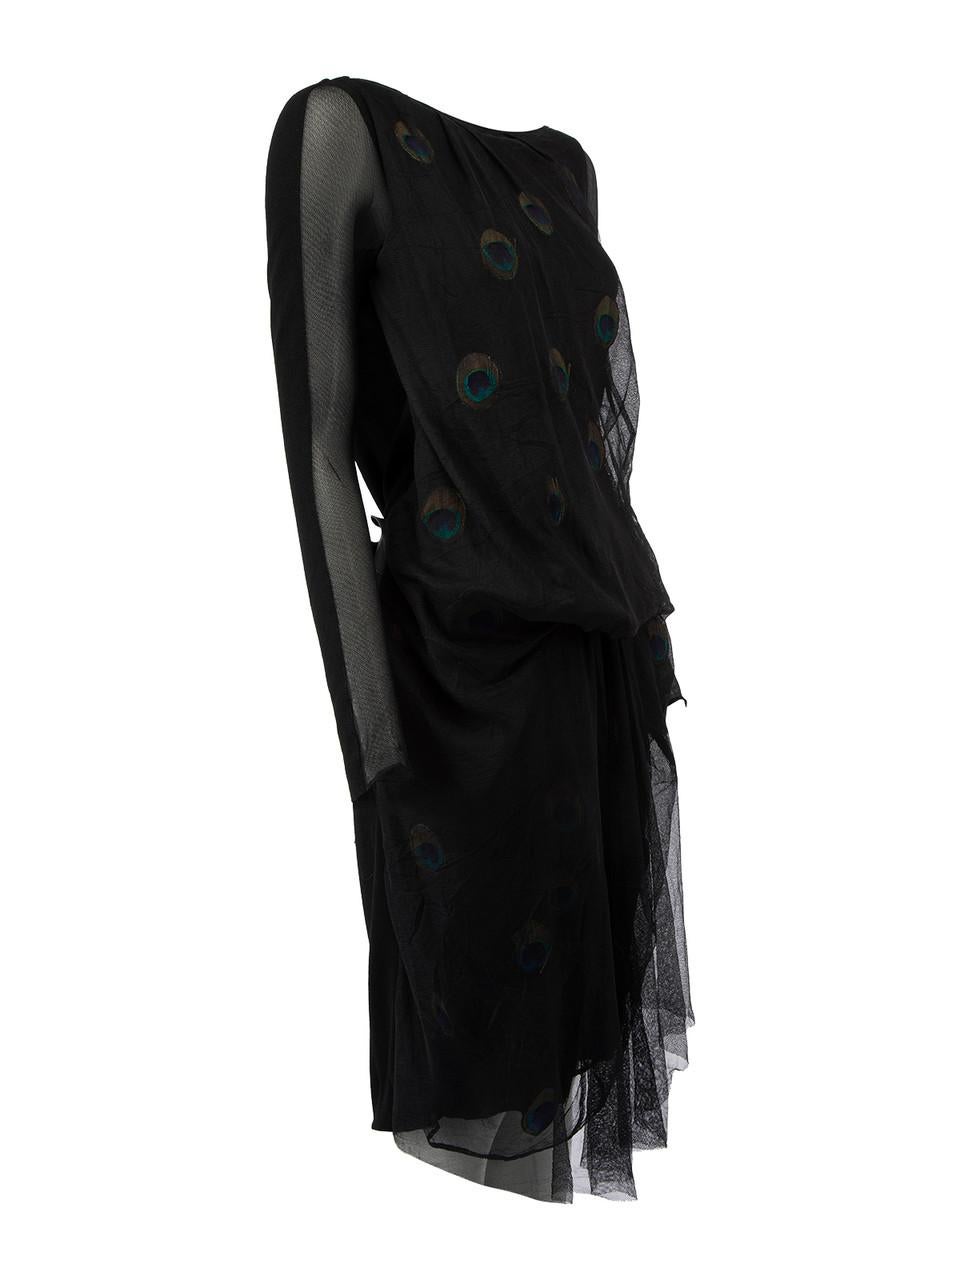 CONDITION is Very good. Minimal wear to dress is evident. Minimal wear to outer sheer fabric on this used Paule Ka designer resale item. 



Details


Black

Synthetic

Dress

Midi length

Partial see through long sleeves

Boat neckline

Double